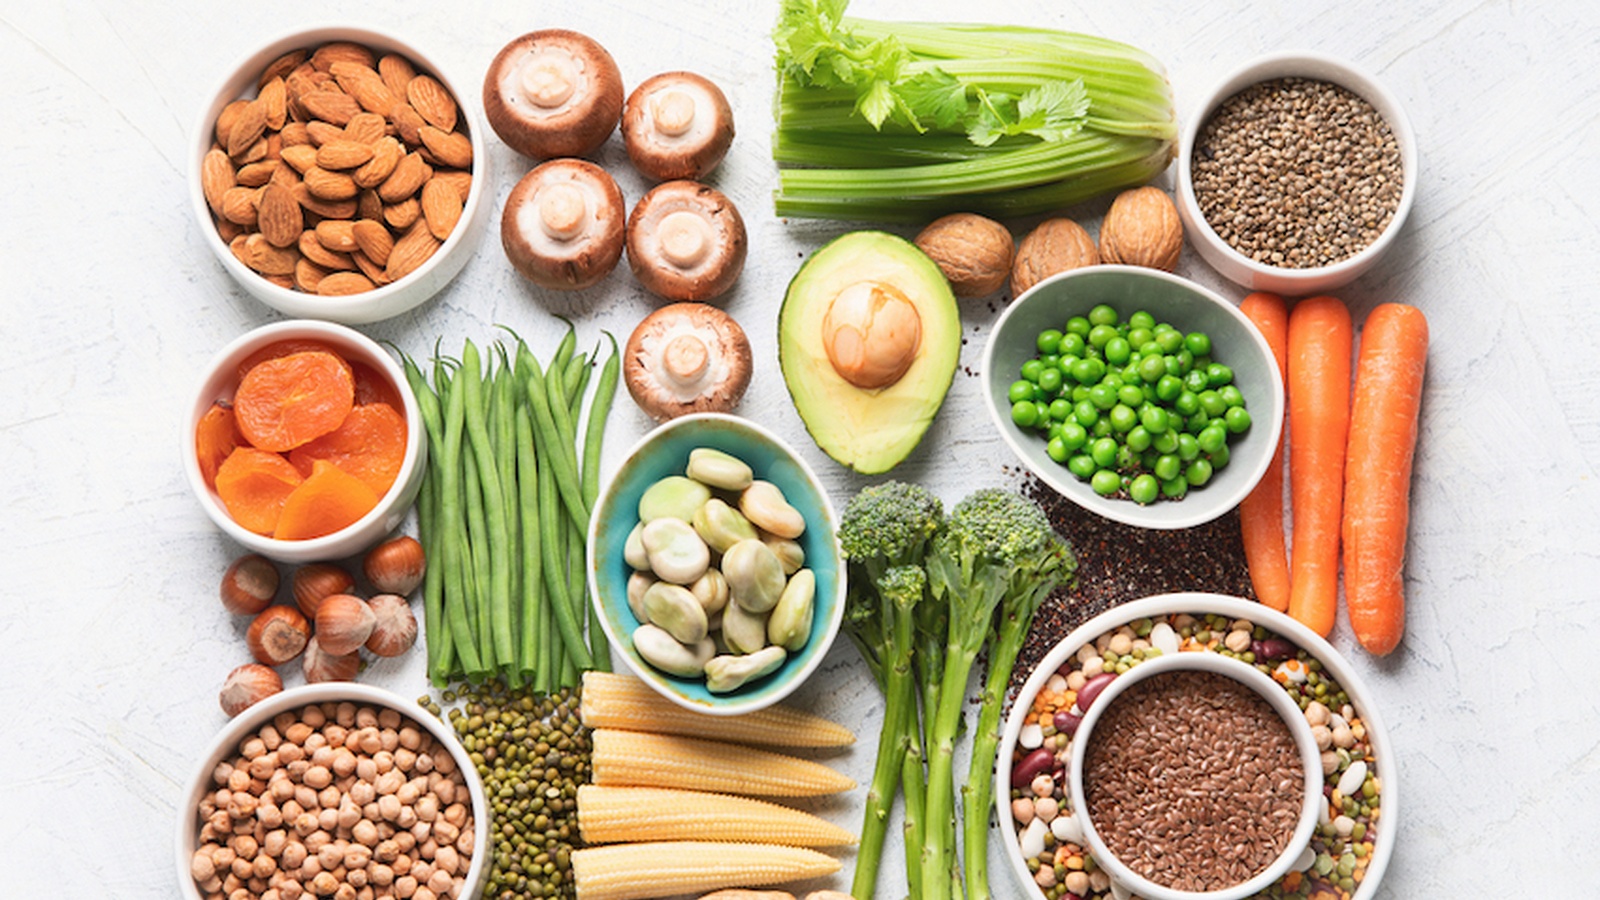 Top 6 Sources of Plant-Based Protein | FOOD MATTERS®